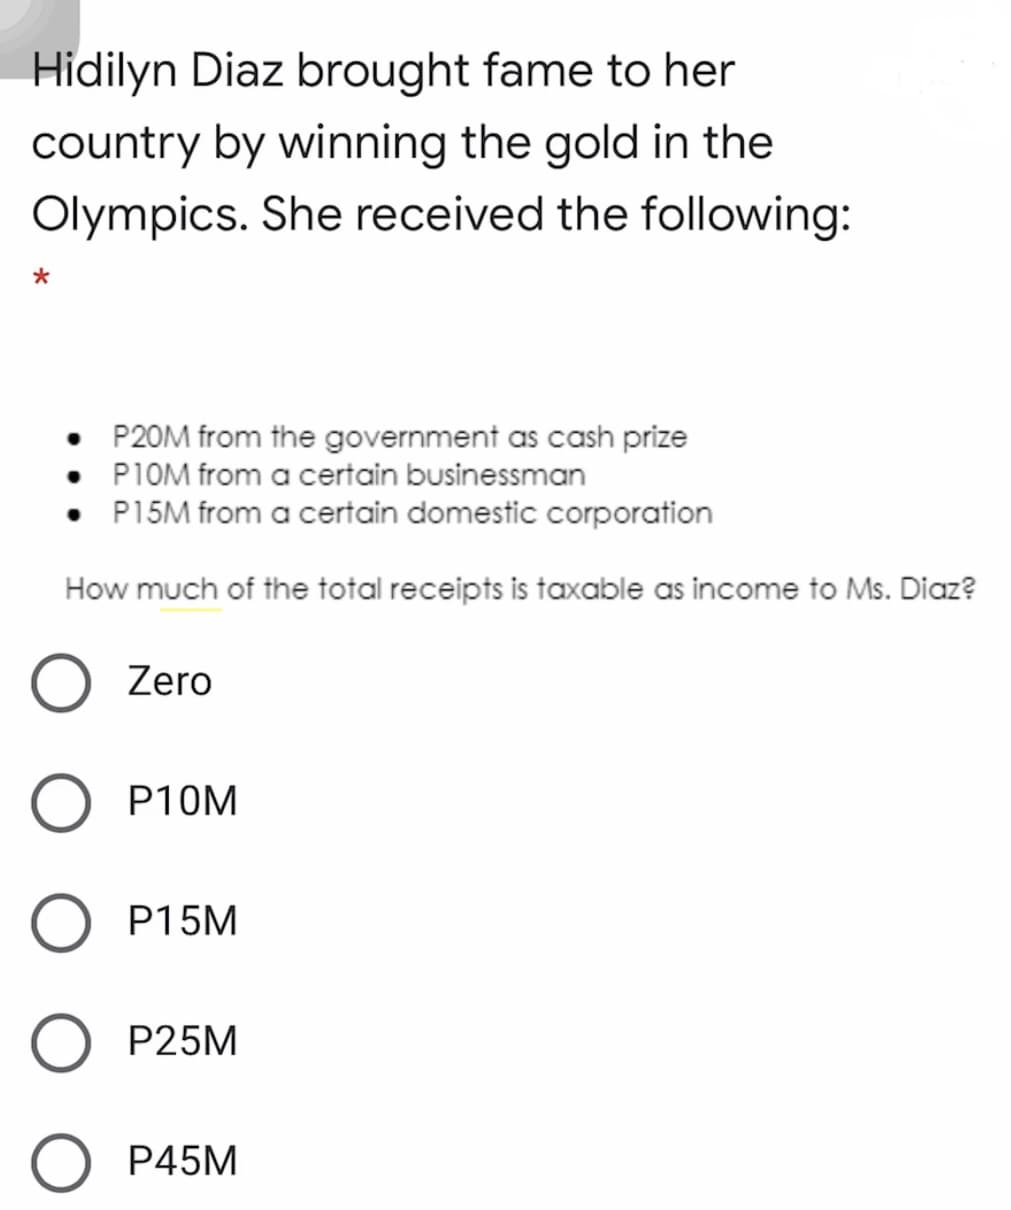 Hidilyn Diaz brought fame to her
country by winning the gold in the
Olympics. She received the following:
*
P20M from the government as cash prize
P1OM from a certain businessman
• P15M from a certain domestic corporation
How much of the total receipts is taxable as income to Ms. Diaz?
Zero
P10M
O P15M
O P25M
P45M
